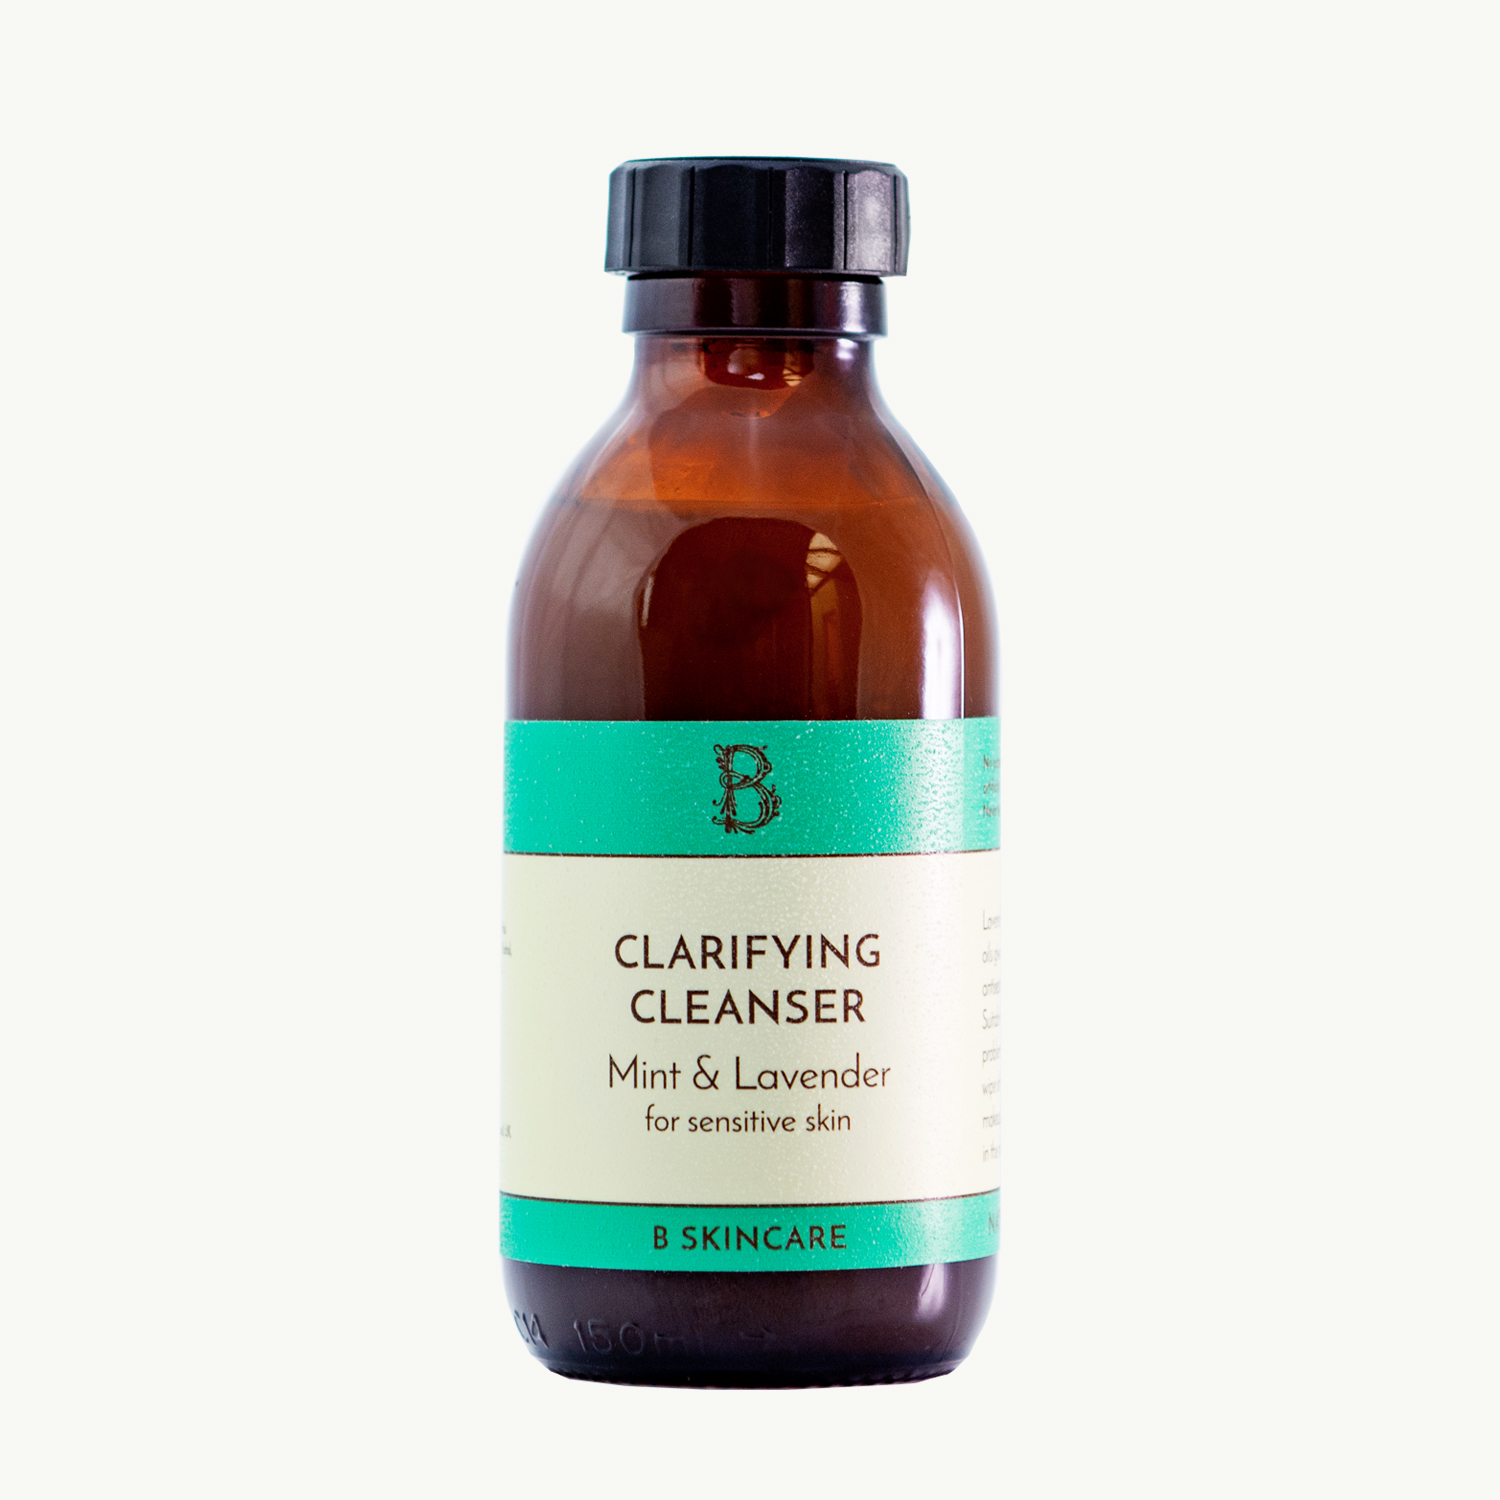 Clarifying Cleanser with Mint and Lavender - screw top lid